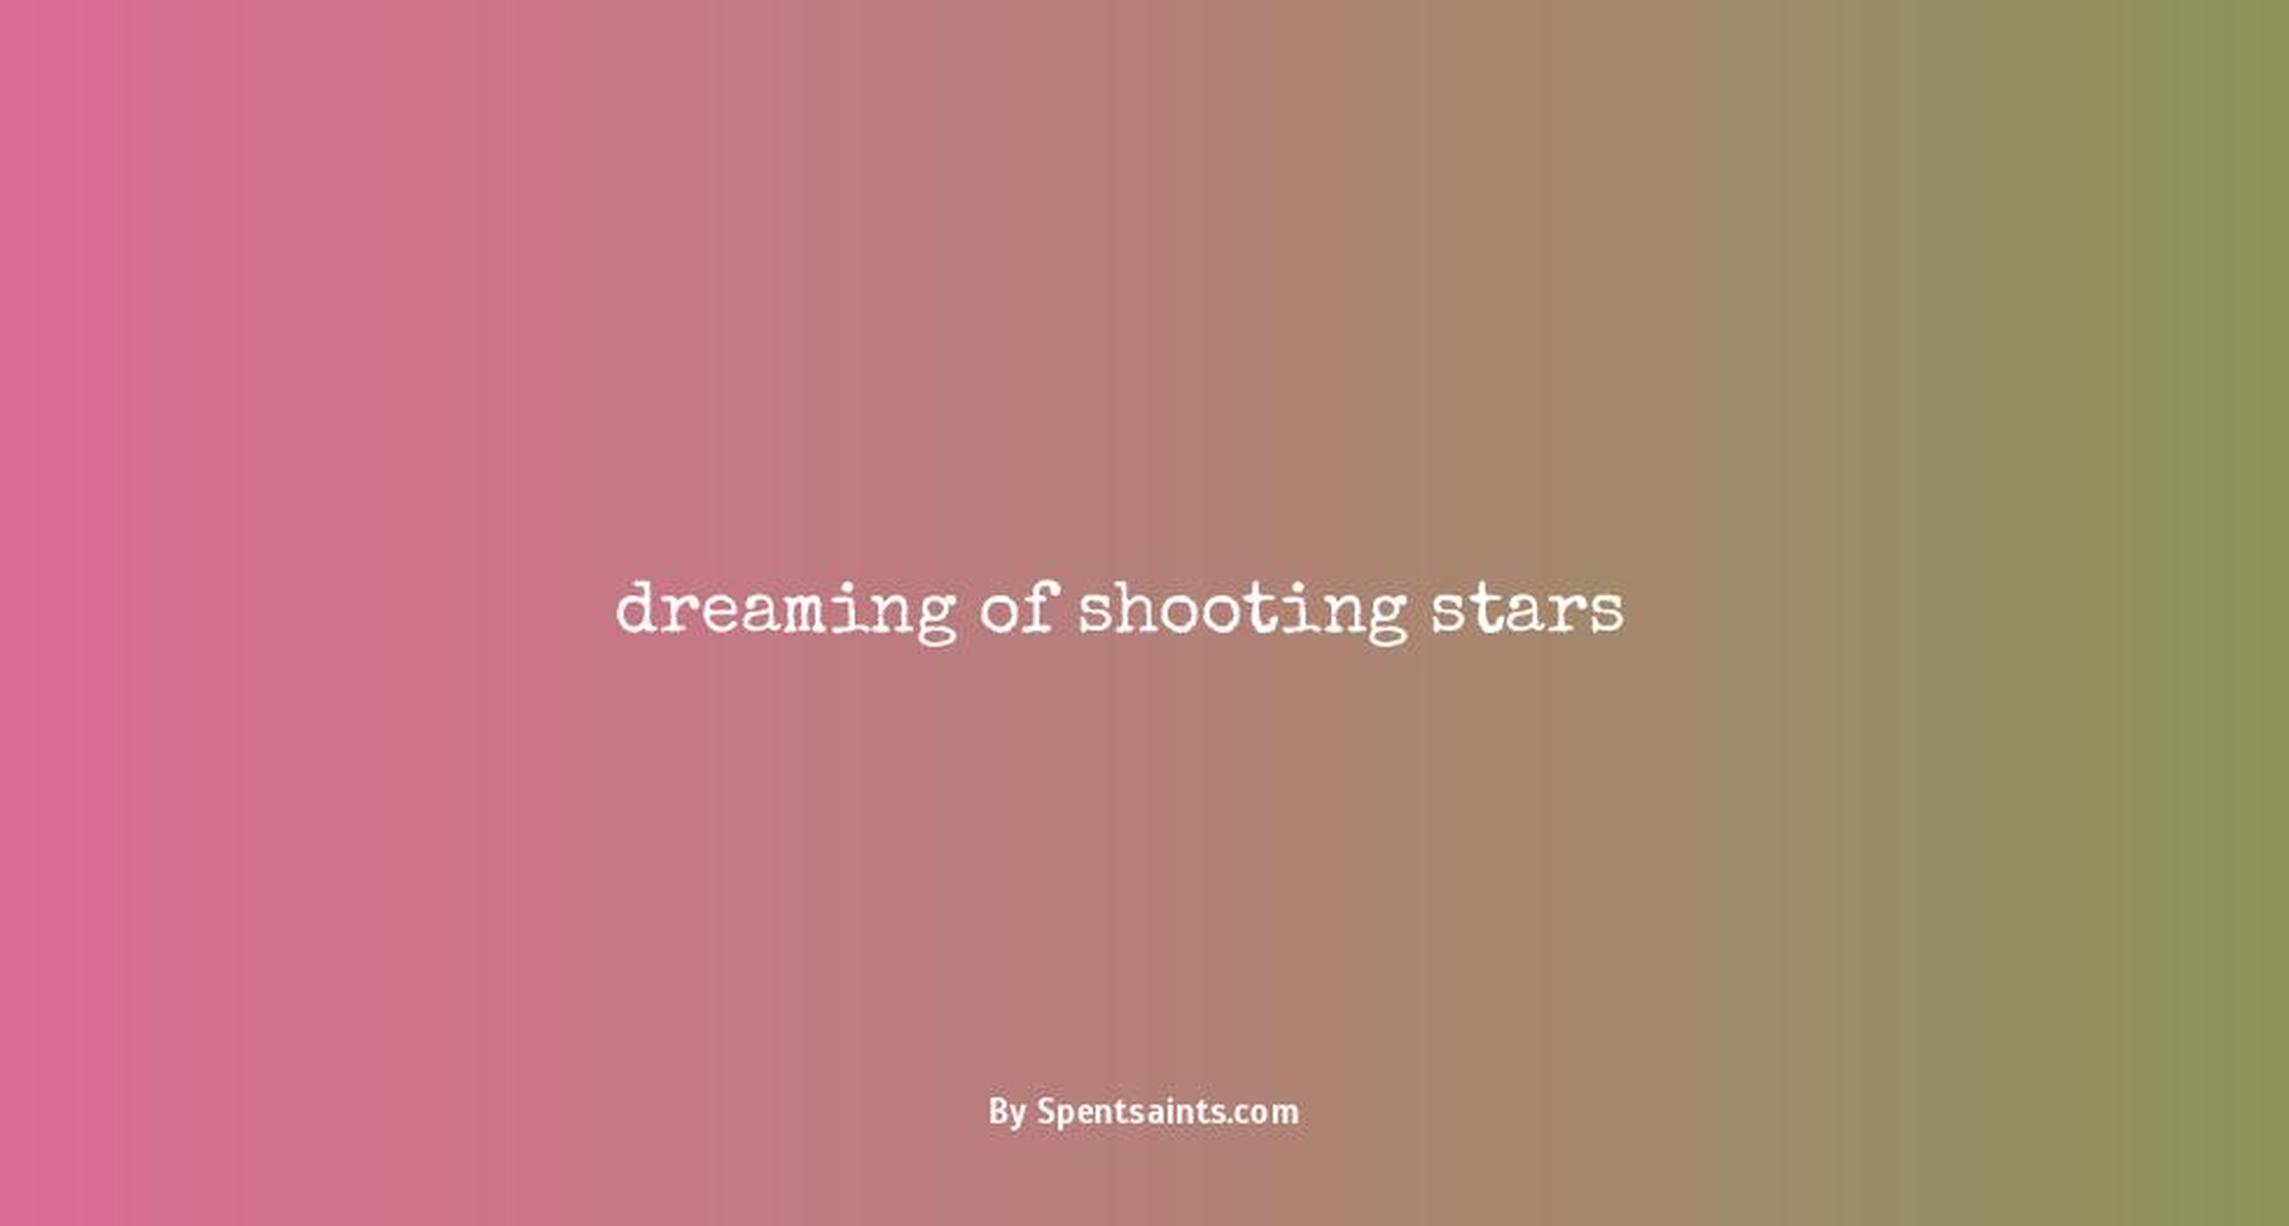 dreaming of shooting stars